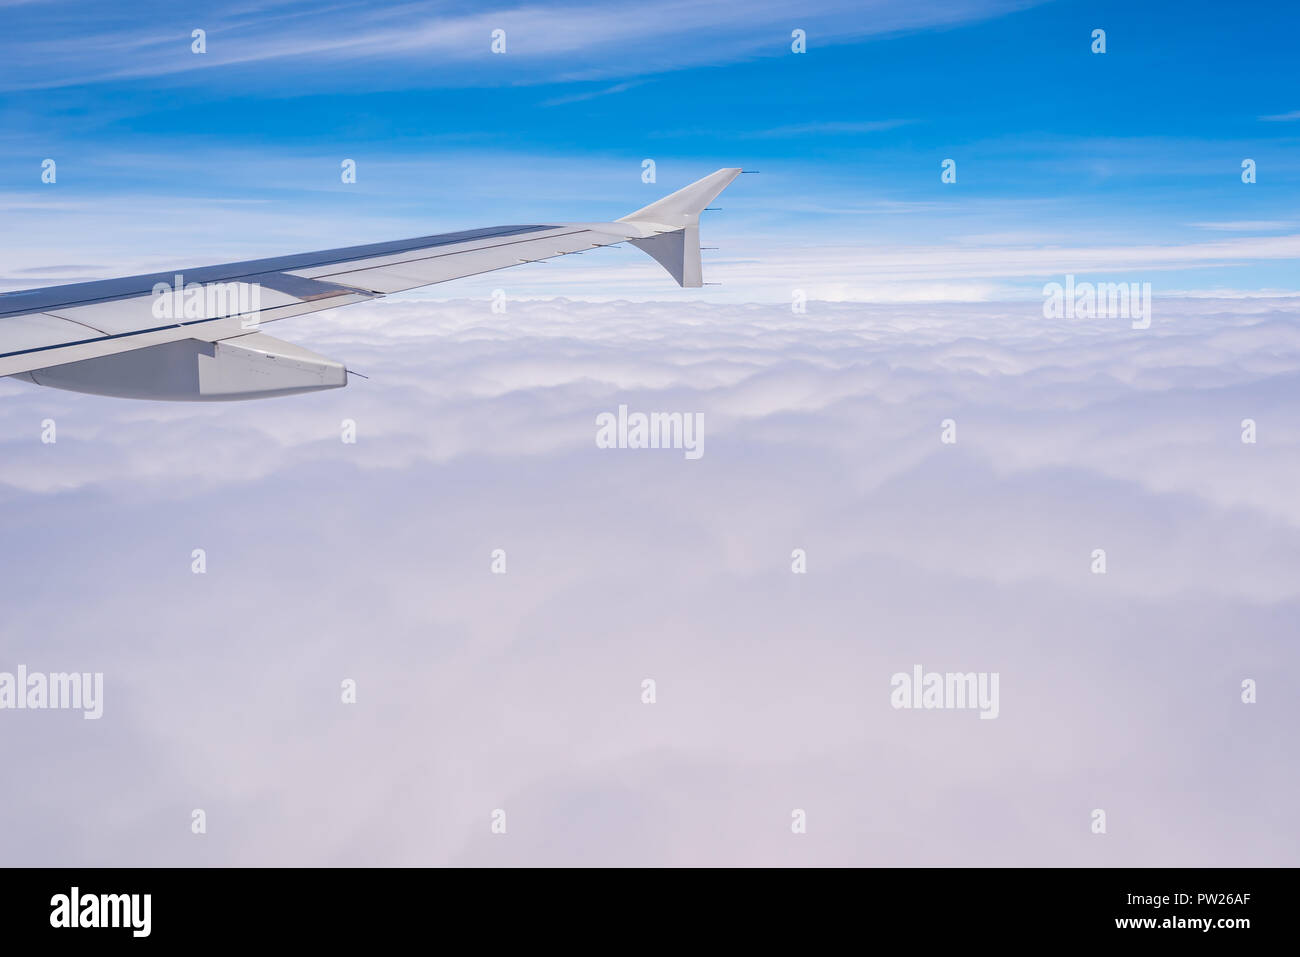 The airplane flew above the Altostratus cloud formation. Stock Photo